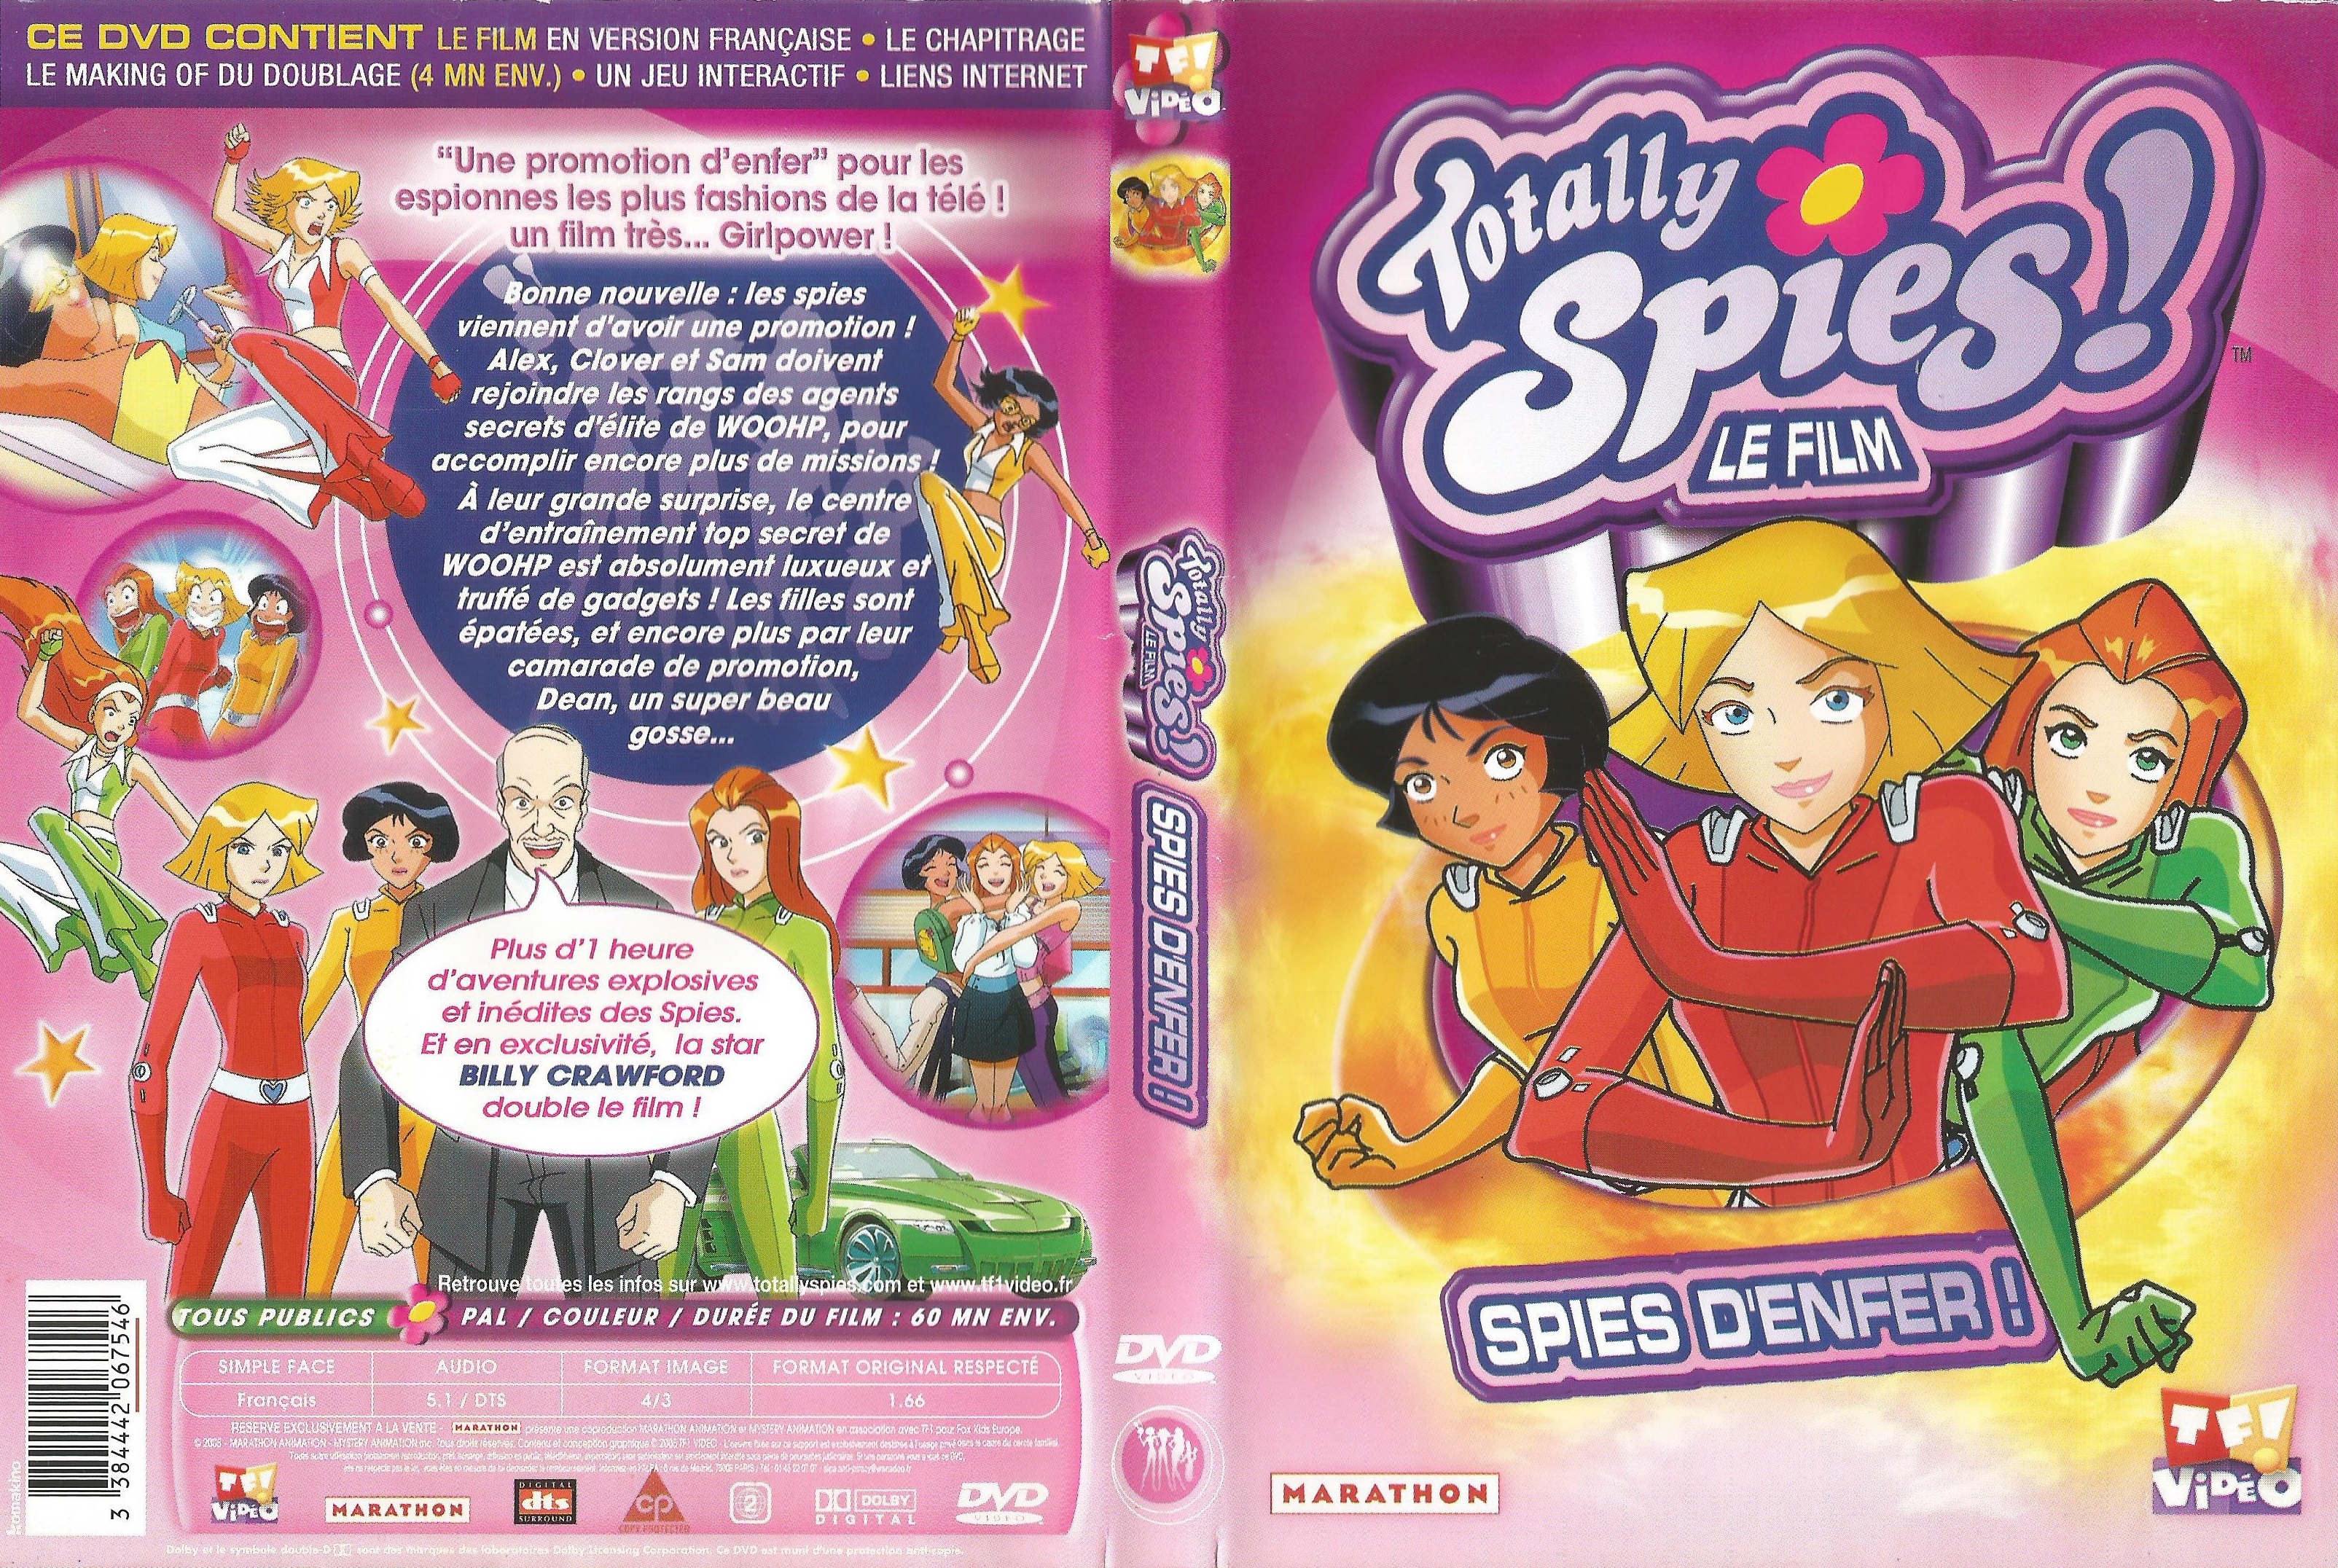 Jaquette DVD Totally Spies Le film - Spies d